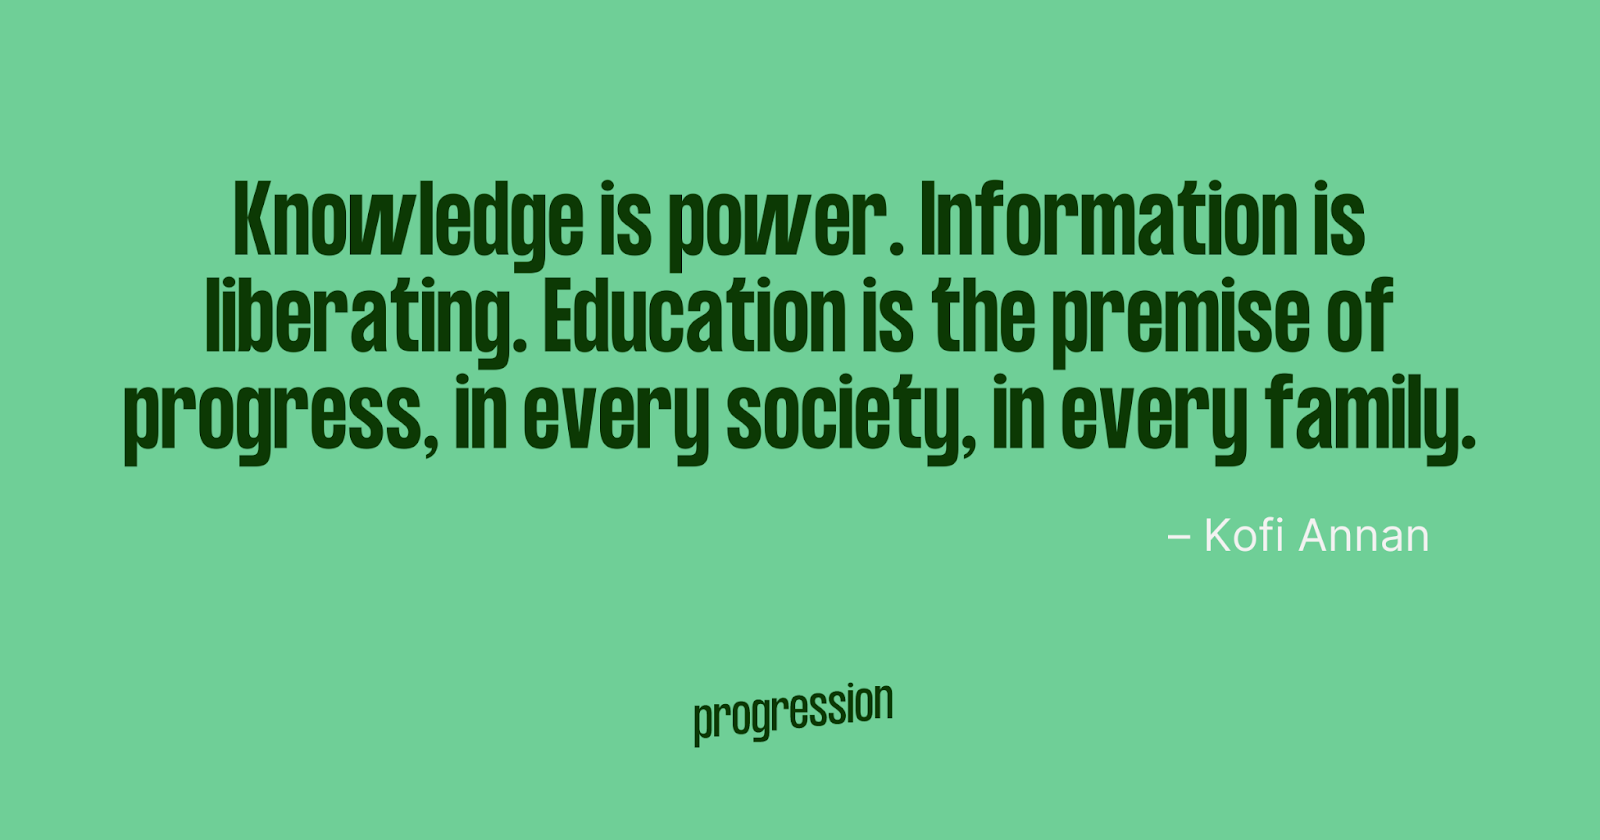 Knowledge is power. Information is liberating. Education is the premise of progress, in every society, in every family